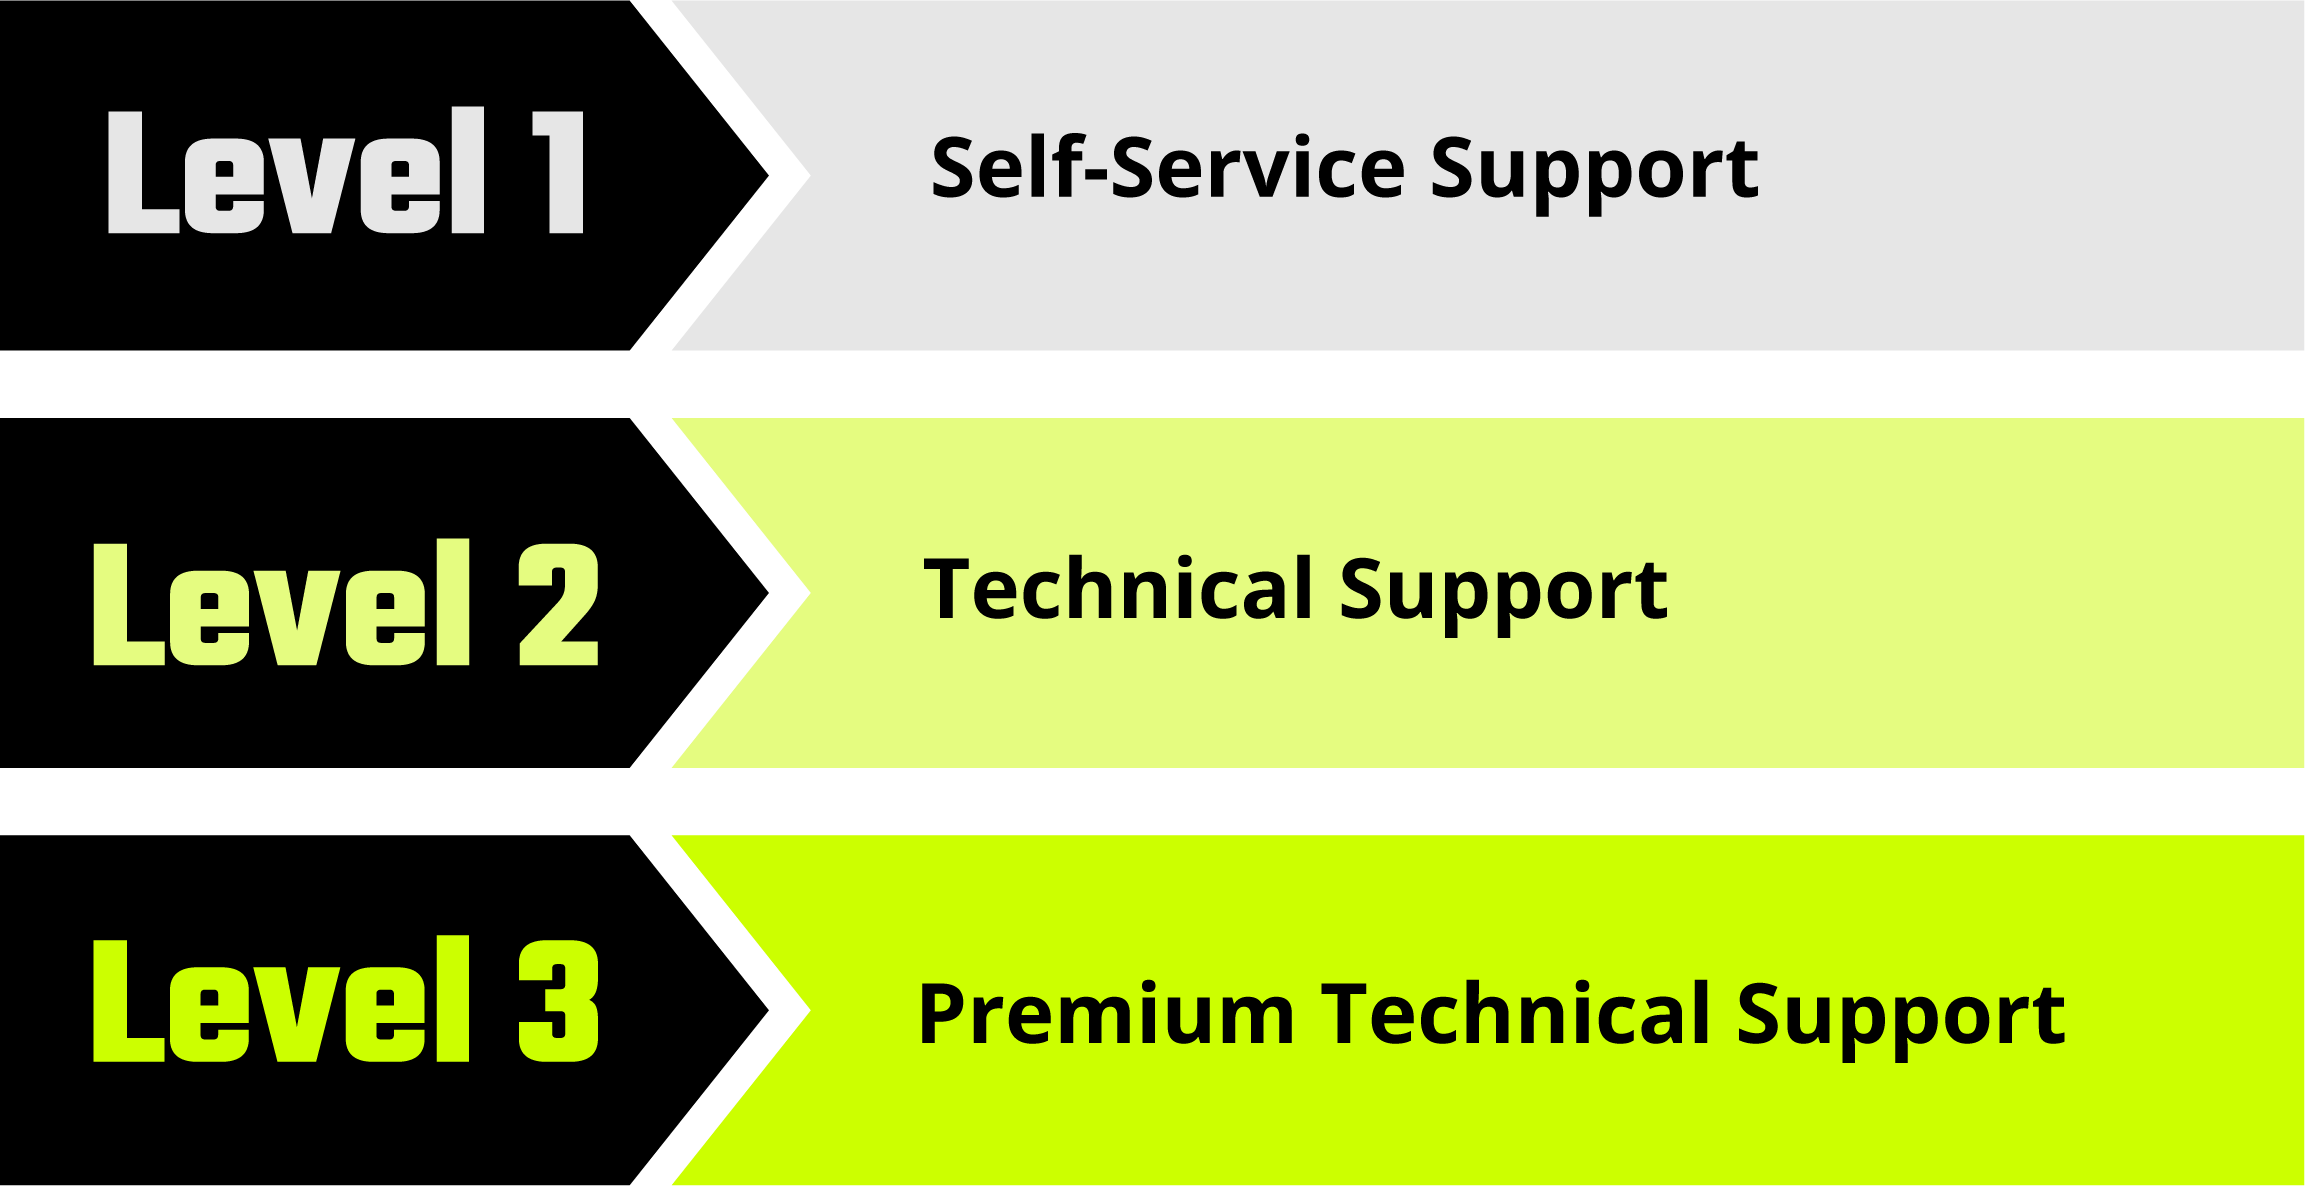 JDC_Support_Customer-Support-Options_Graphic_v2-01